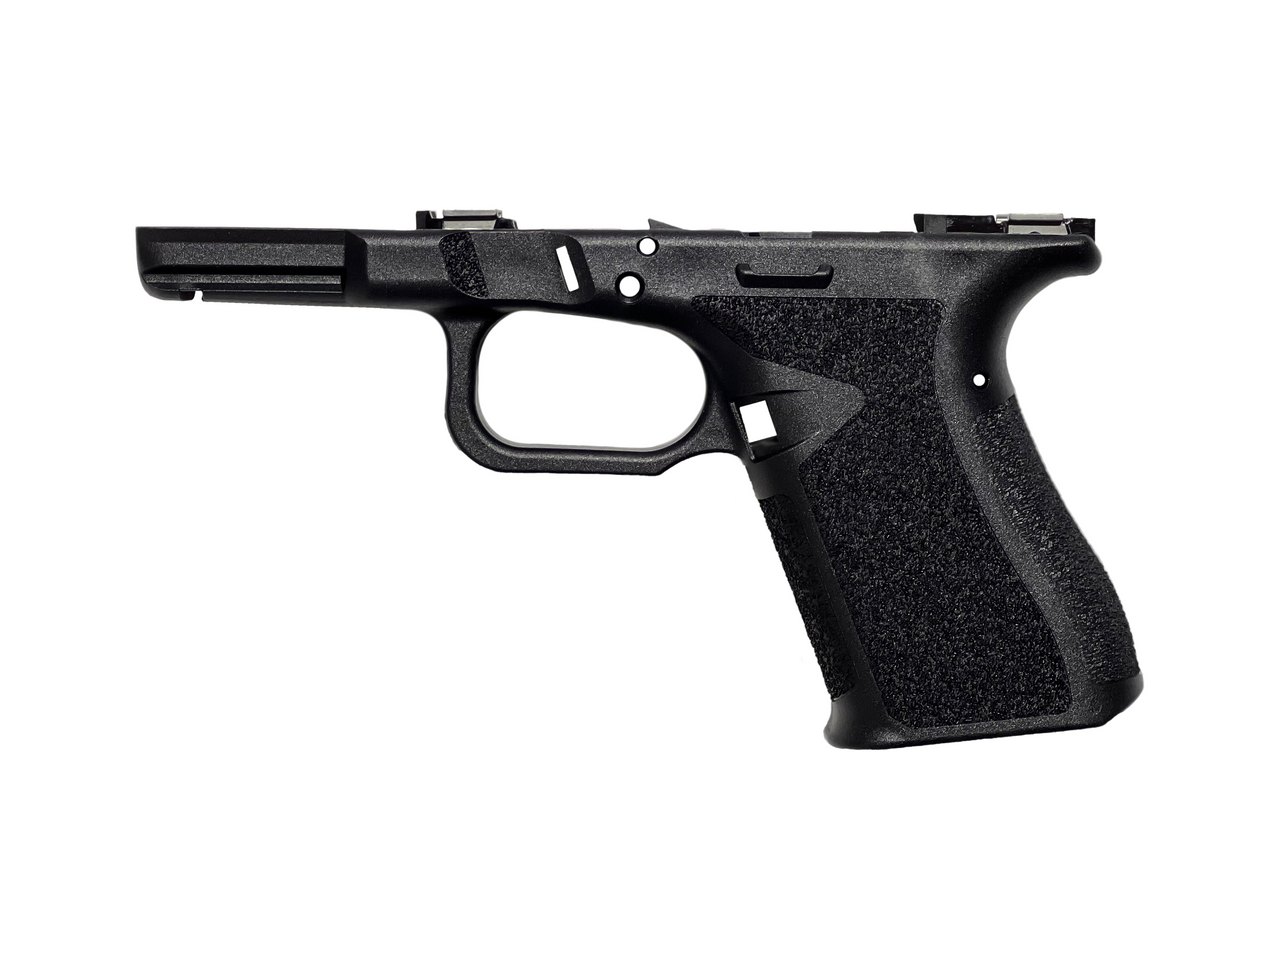 Combat Armory Stripped Pistol Lower / Frame For Gen 3 Glock® 19/23/32 Parts  Compatible Locking Block Included - COMBAT ARMORY